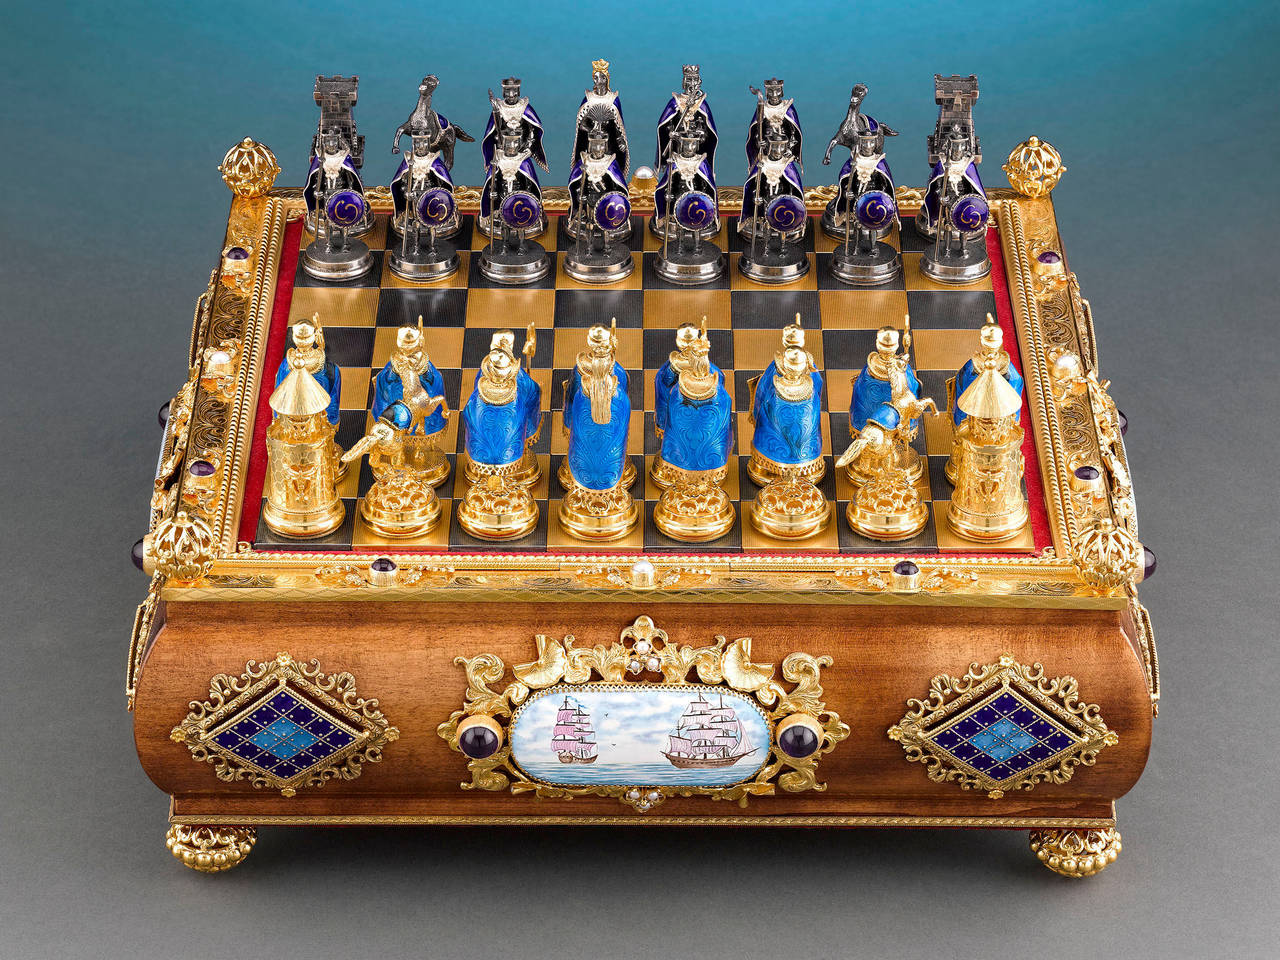 Two medieval armies square off in this magnificently crafted Austro-Hungarian silver gilt chess and enamel set. The game pieces are cloaked in vivid purple and blue guilloché enamel and feature silver and silver gilt bodies, respectively, to